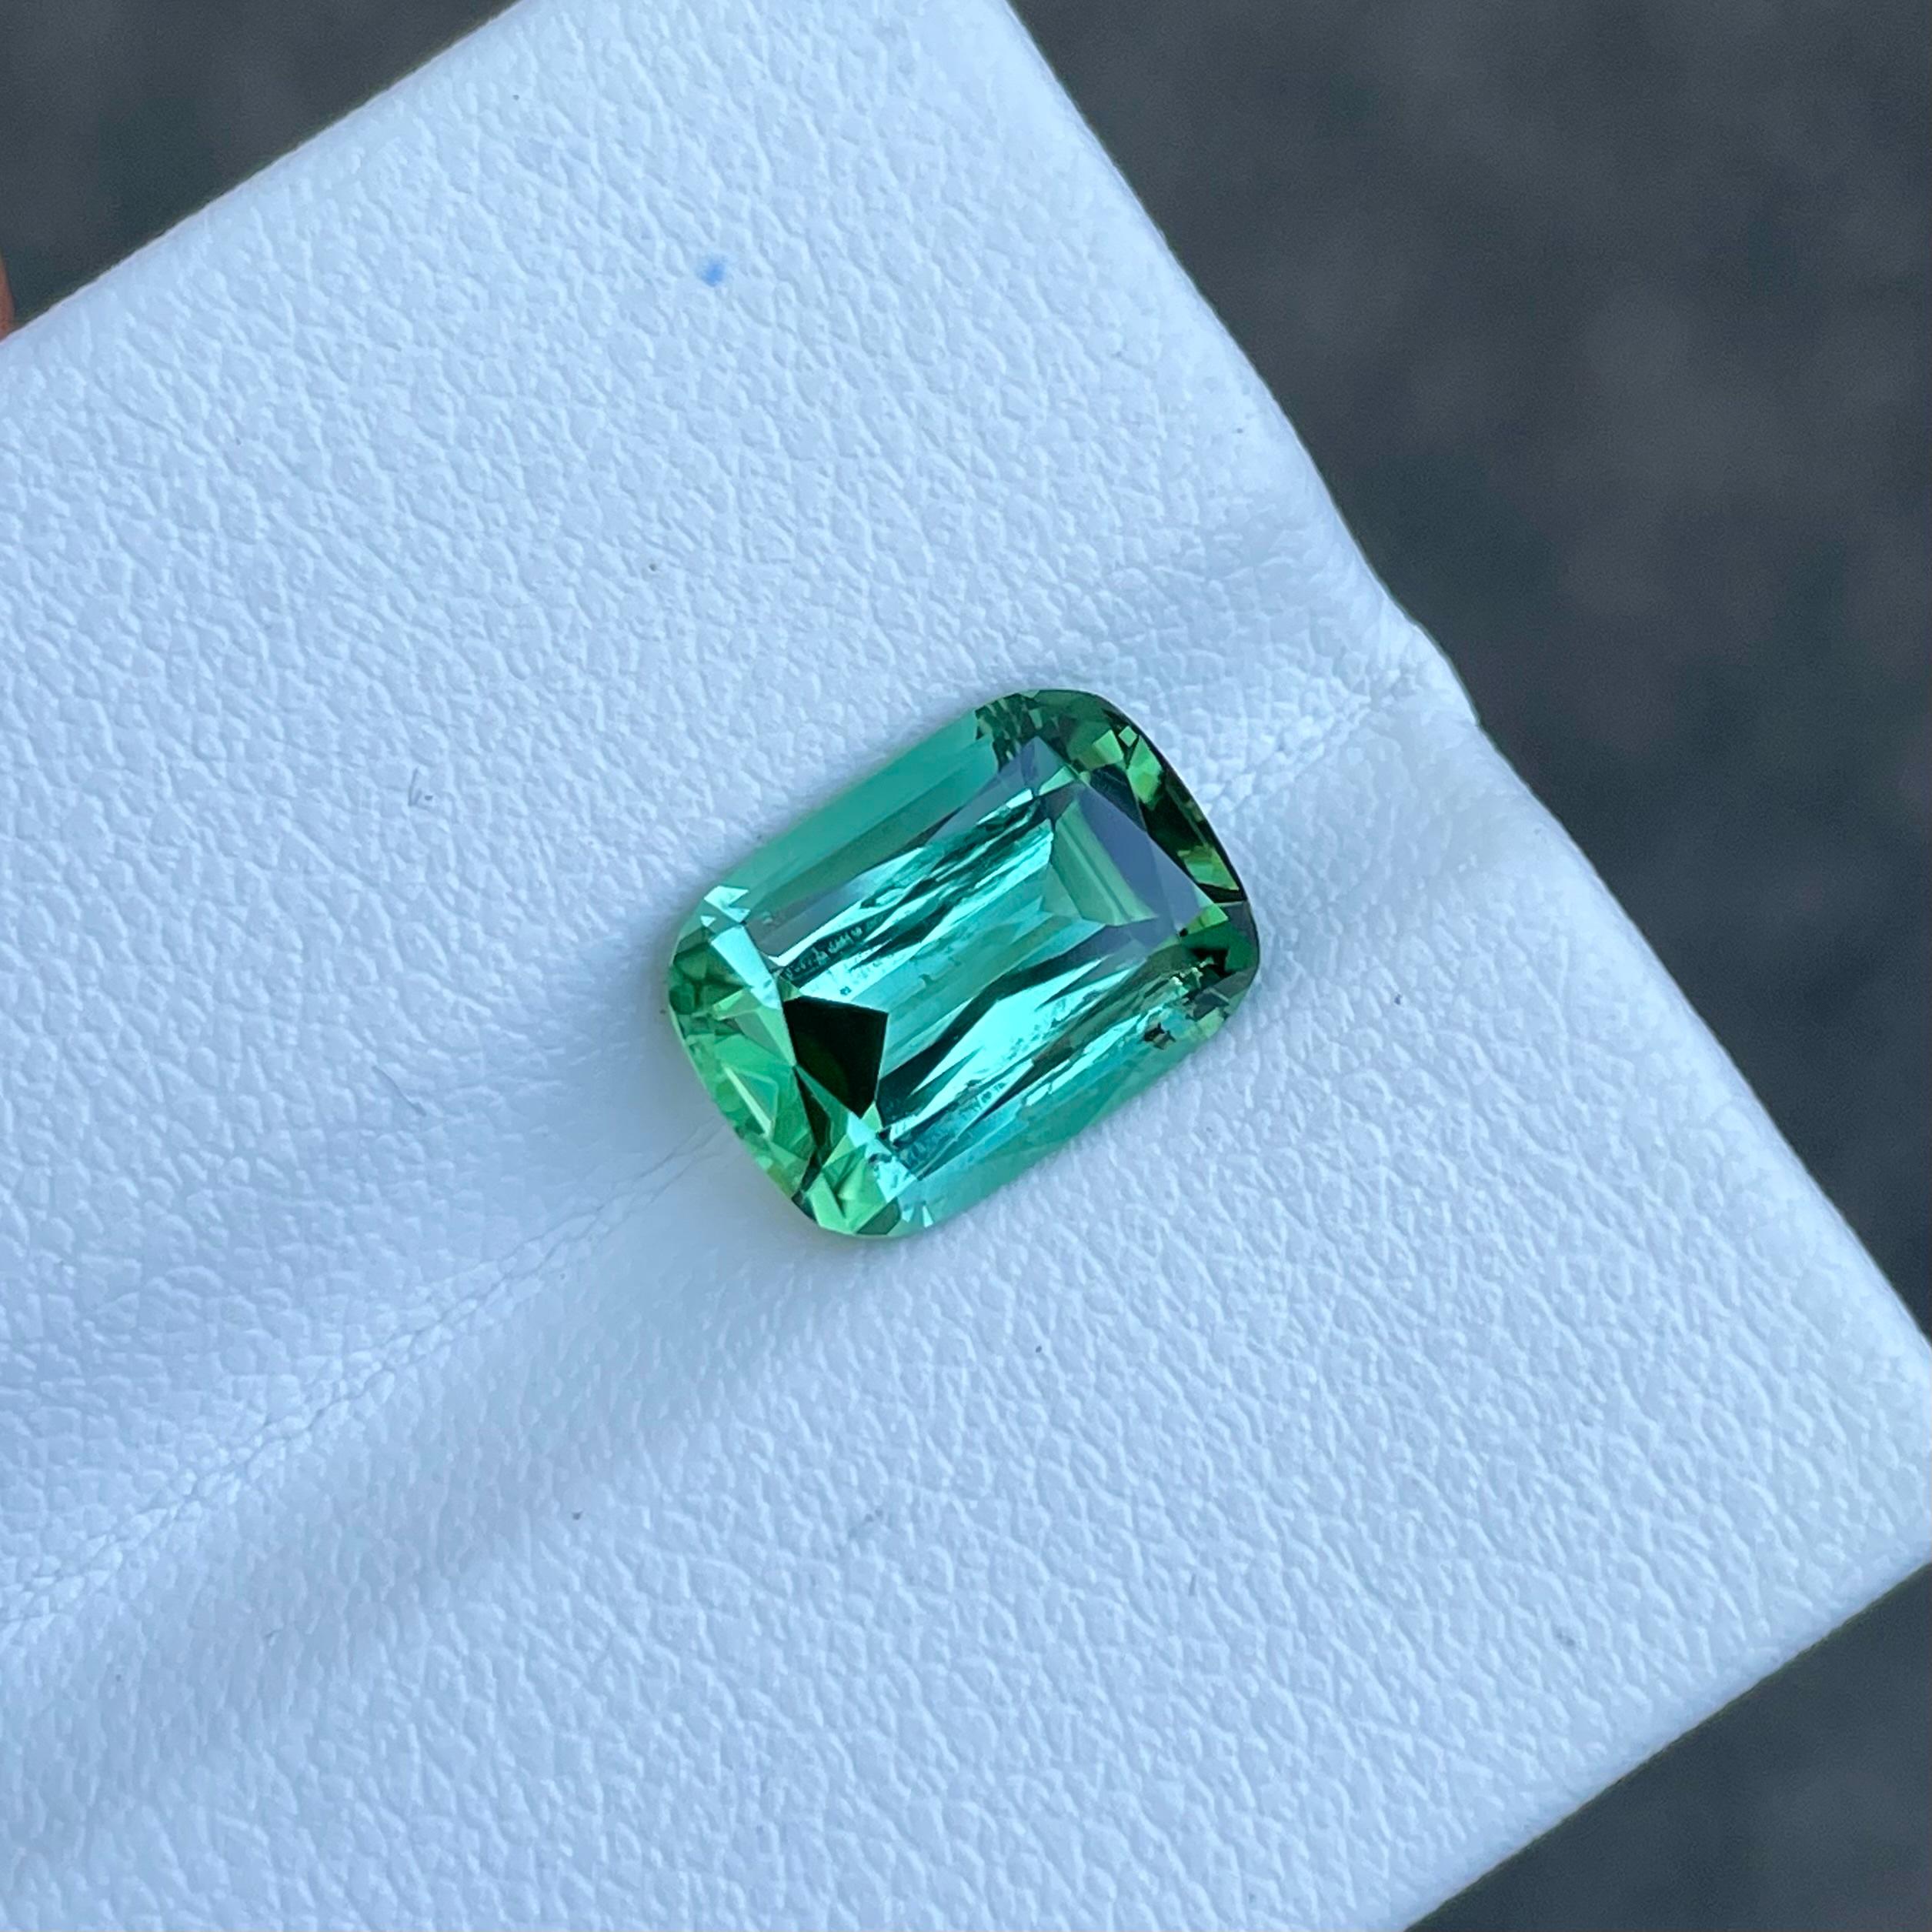 Weight 4.0 carats 
Dimensions 11.3x8.3x5.7 mm
Treatment None
Clarity VVS (Very, Very Slightly Included)
Origin Afghanistan
Shape Step Cushion
Cut Cushion




The Bluish Green Tourmaline, boasting a substantial weight of 4.00 carats, is a gemstone